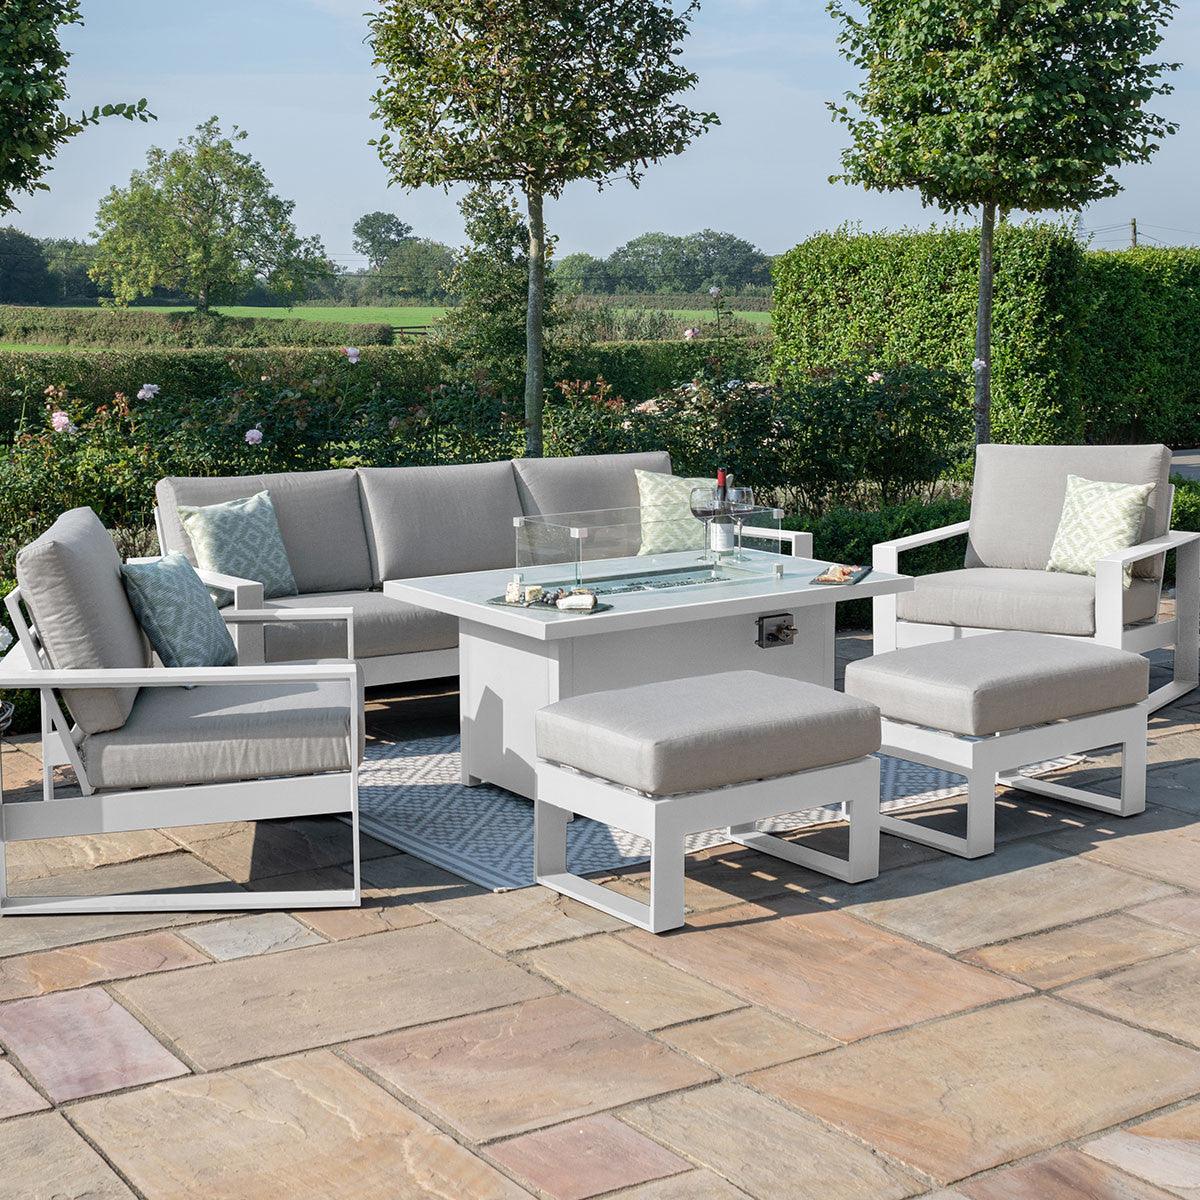 Amalfi 3 Seat Sofa Set With Rectangular Fire Pit Table - Vookoo Lifestyle